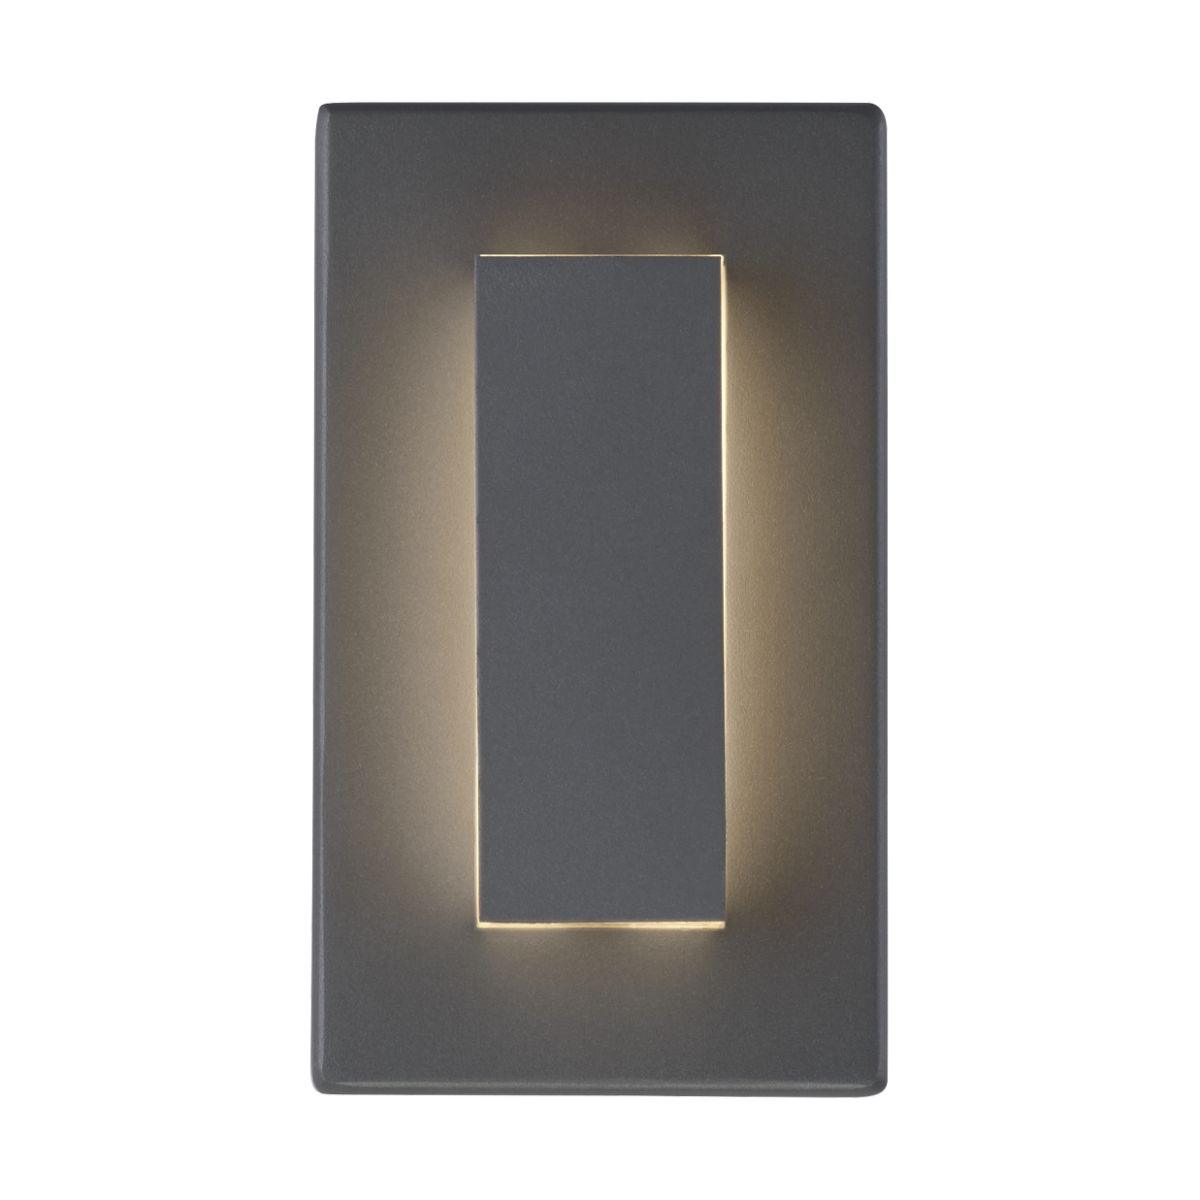 Aspen 15 In. LED Oudoor Wall Sconce